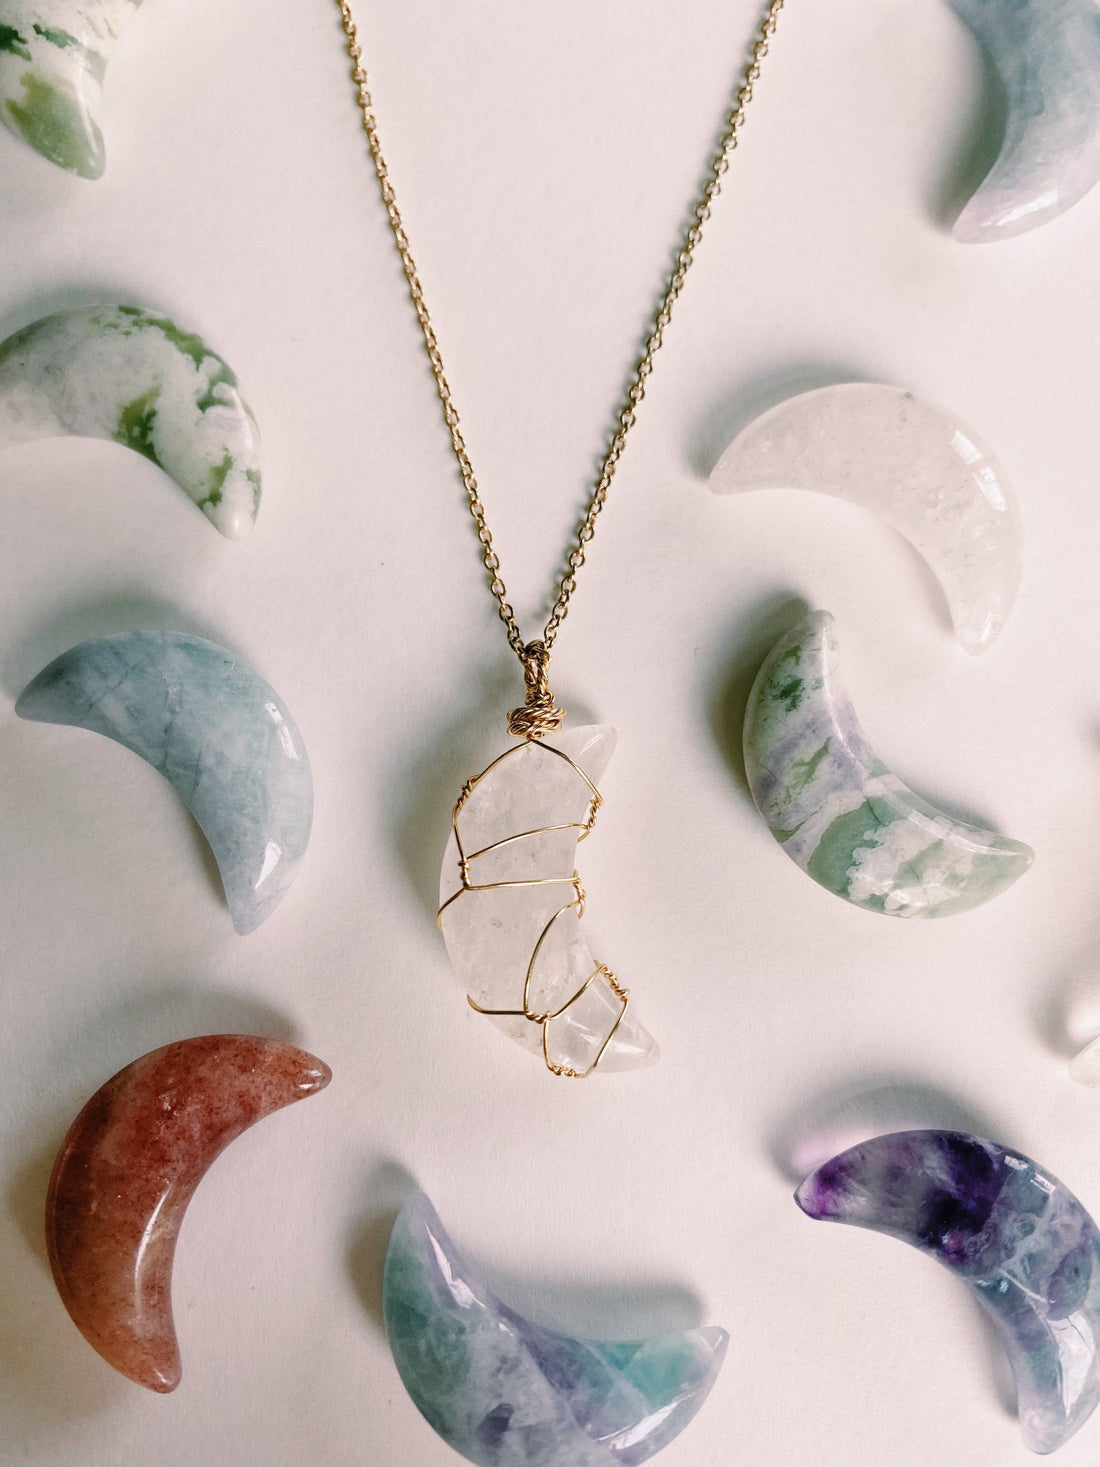 Crystal Jewelry: The Perfect Accessories for Self-Expression and Empowerment